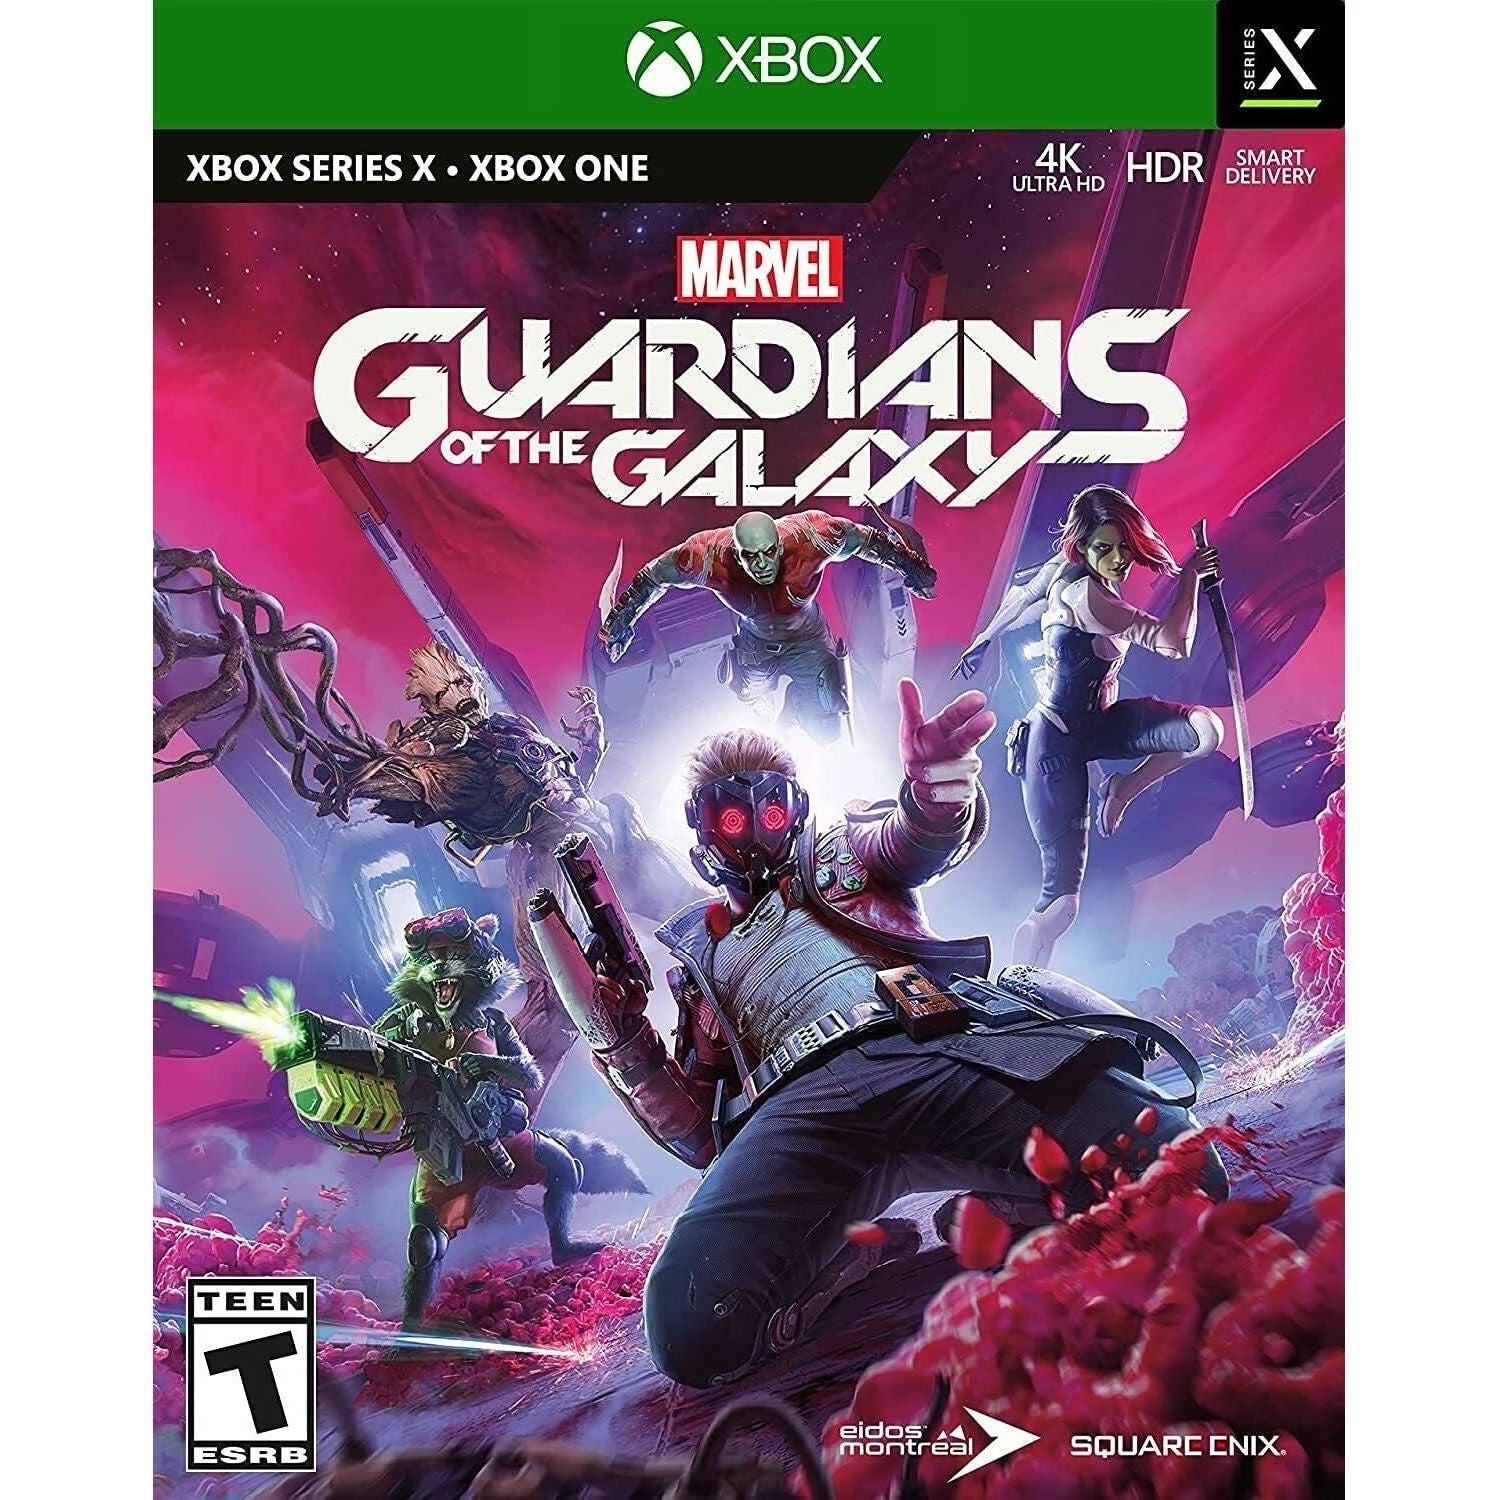 Xbox Series X - Marvel's Guardians of the Galaxy